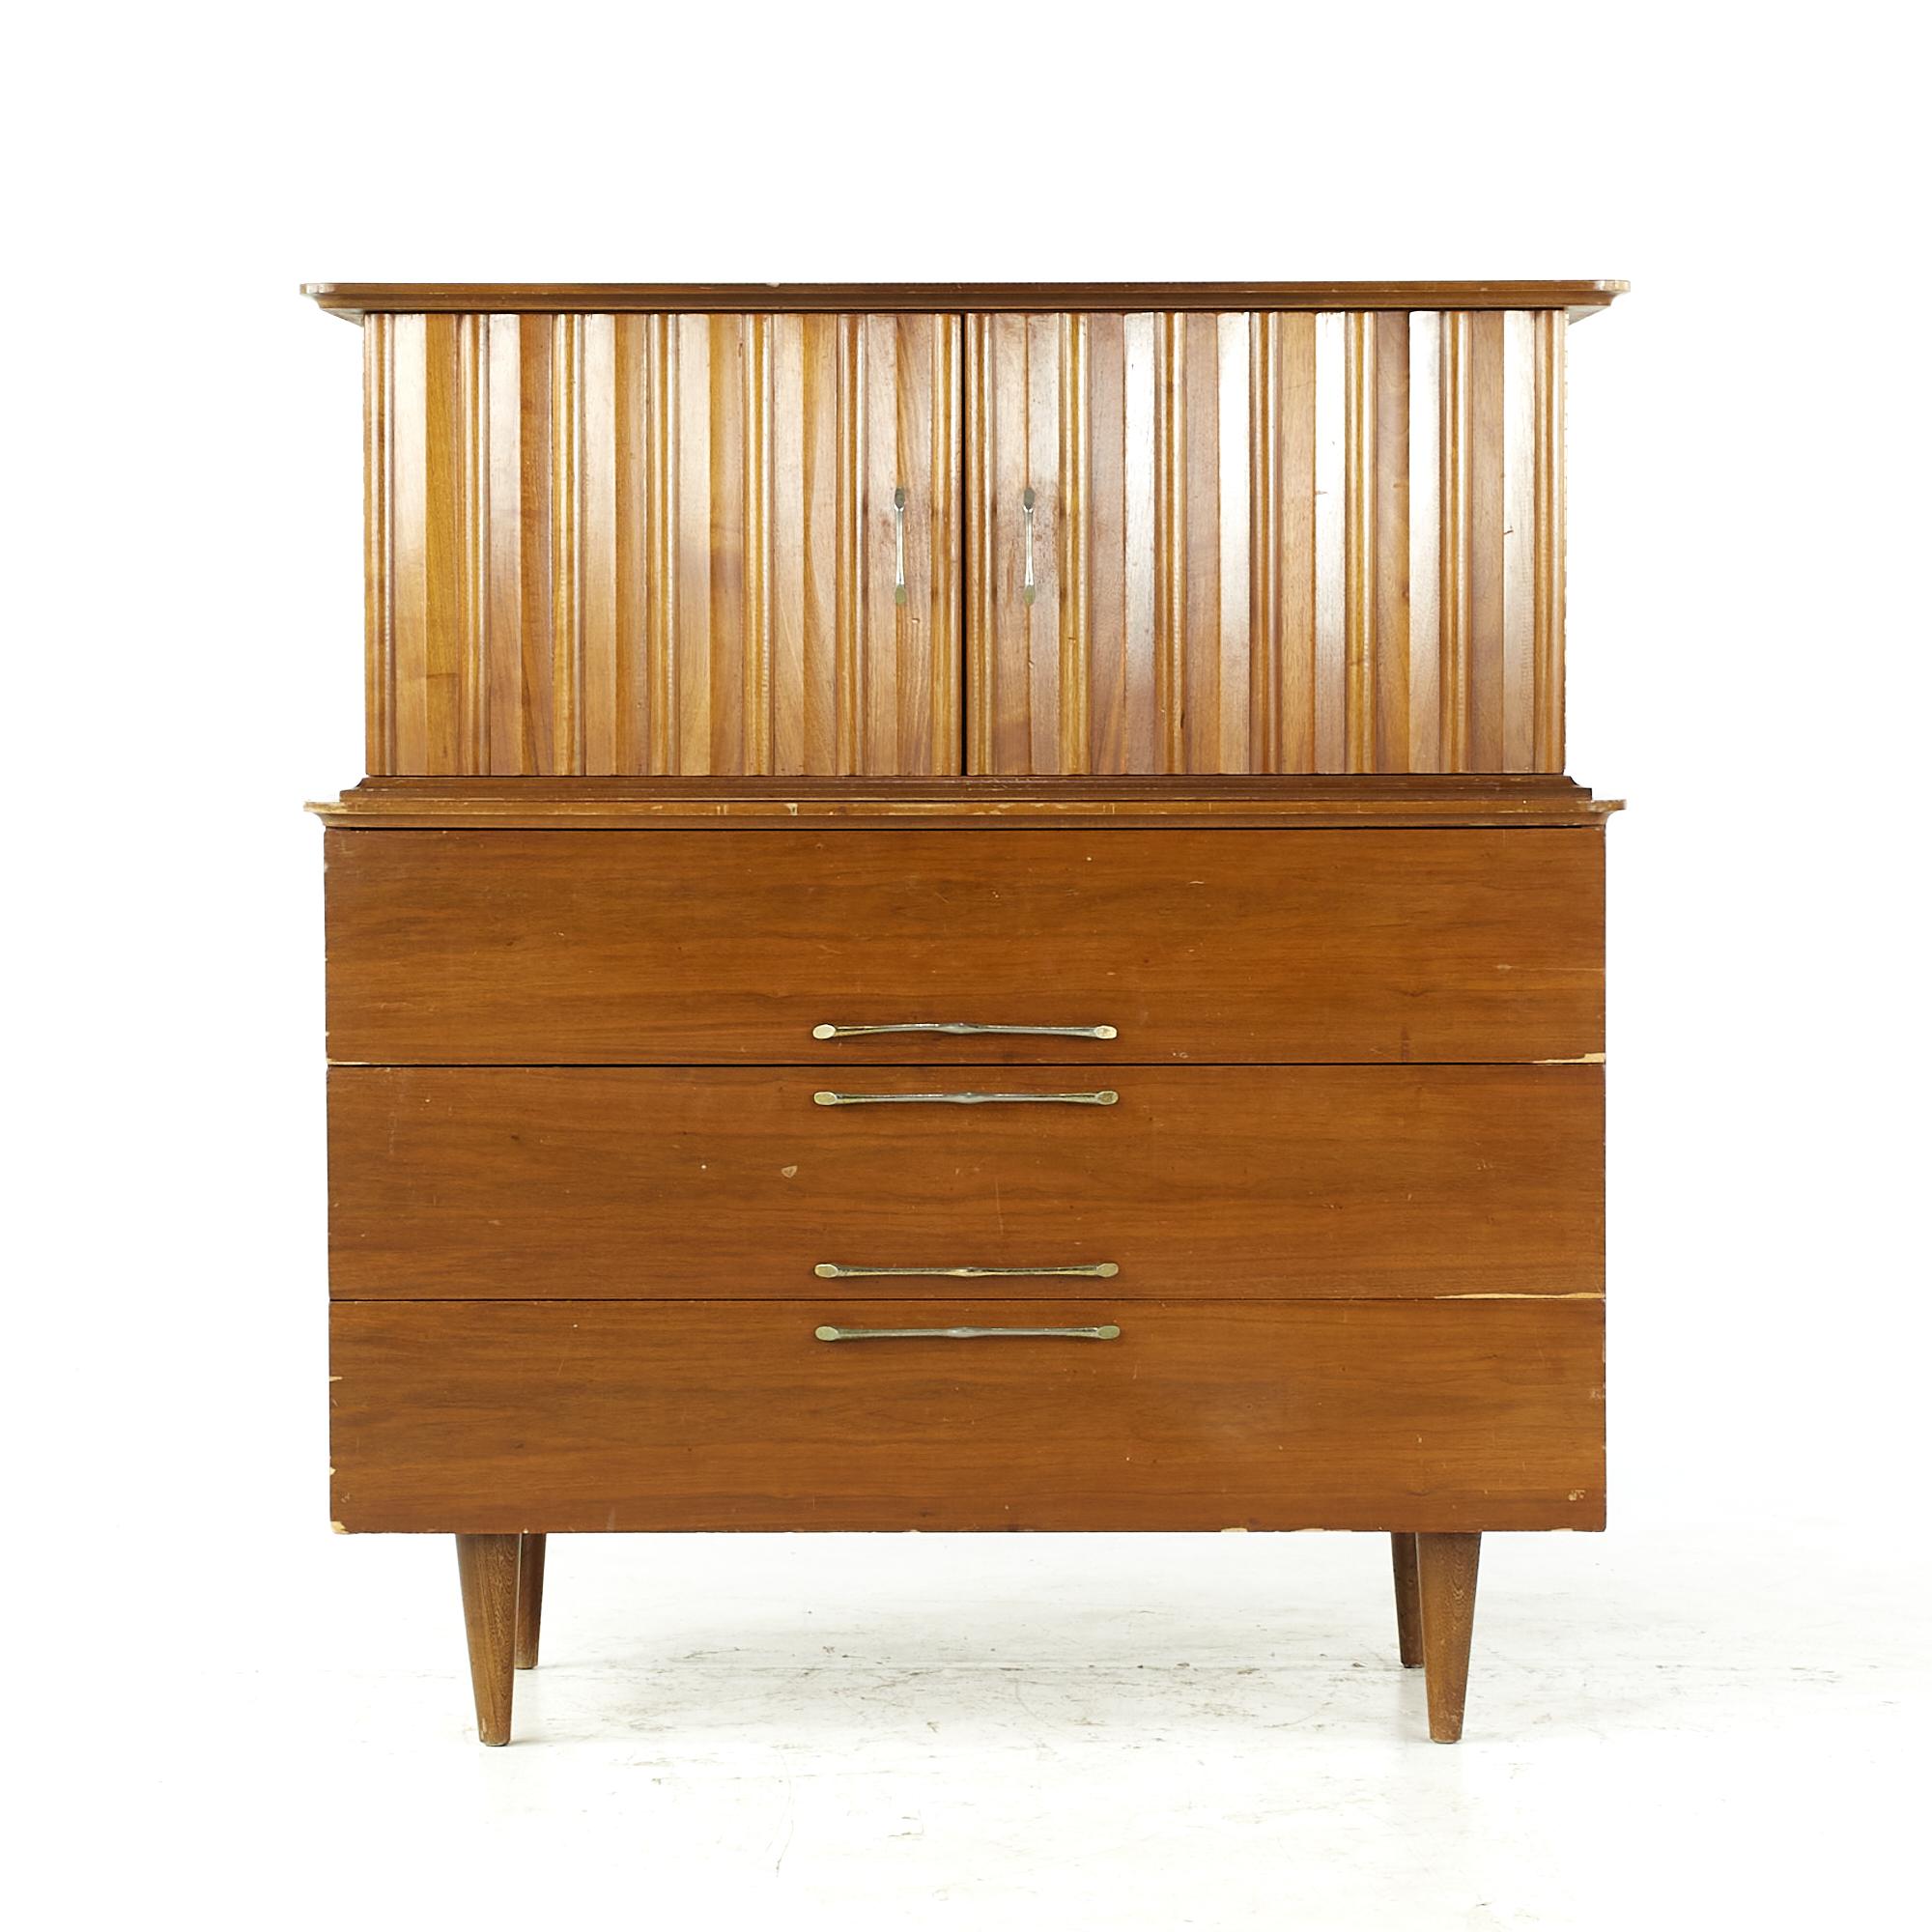 Young manufacturing midcentury Walnut highboy dresser.

This highboy measures: 42 wide x 19 deep x 46.75 inches high

All pieces of furniture can be had in what we call restored vintage condition. That means the piece is restored upon purchase